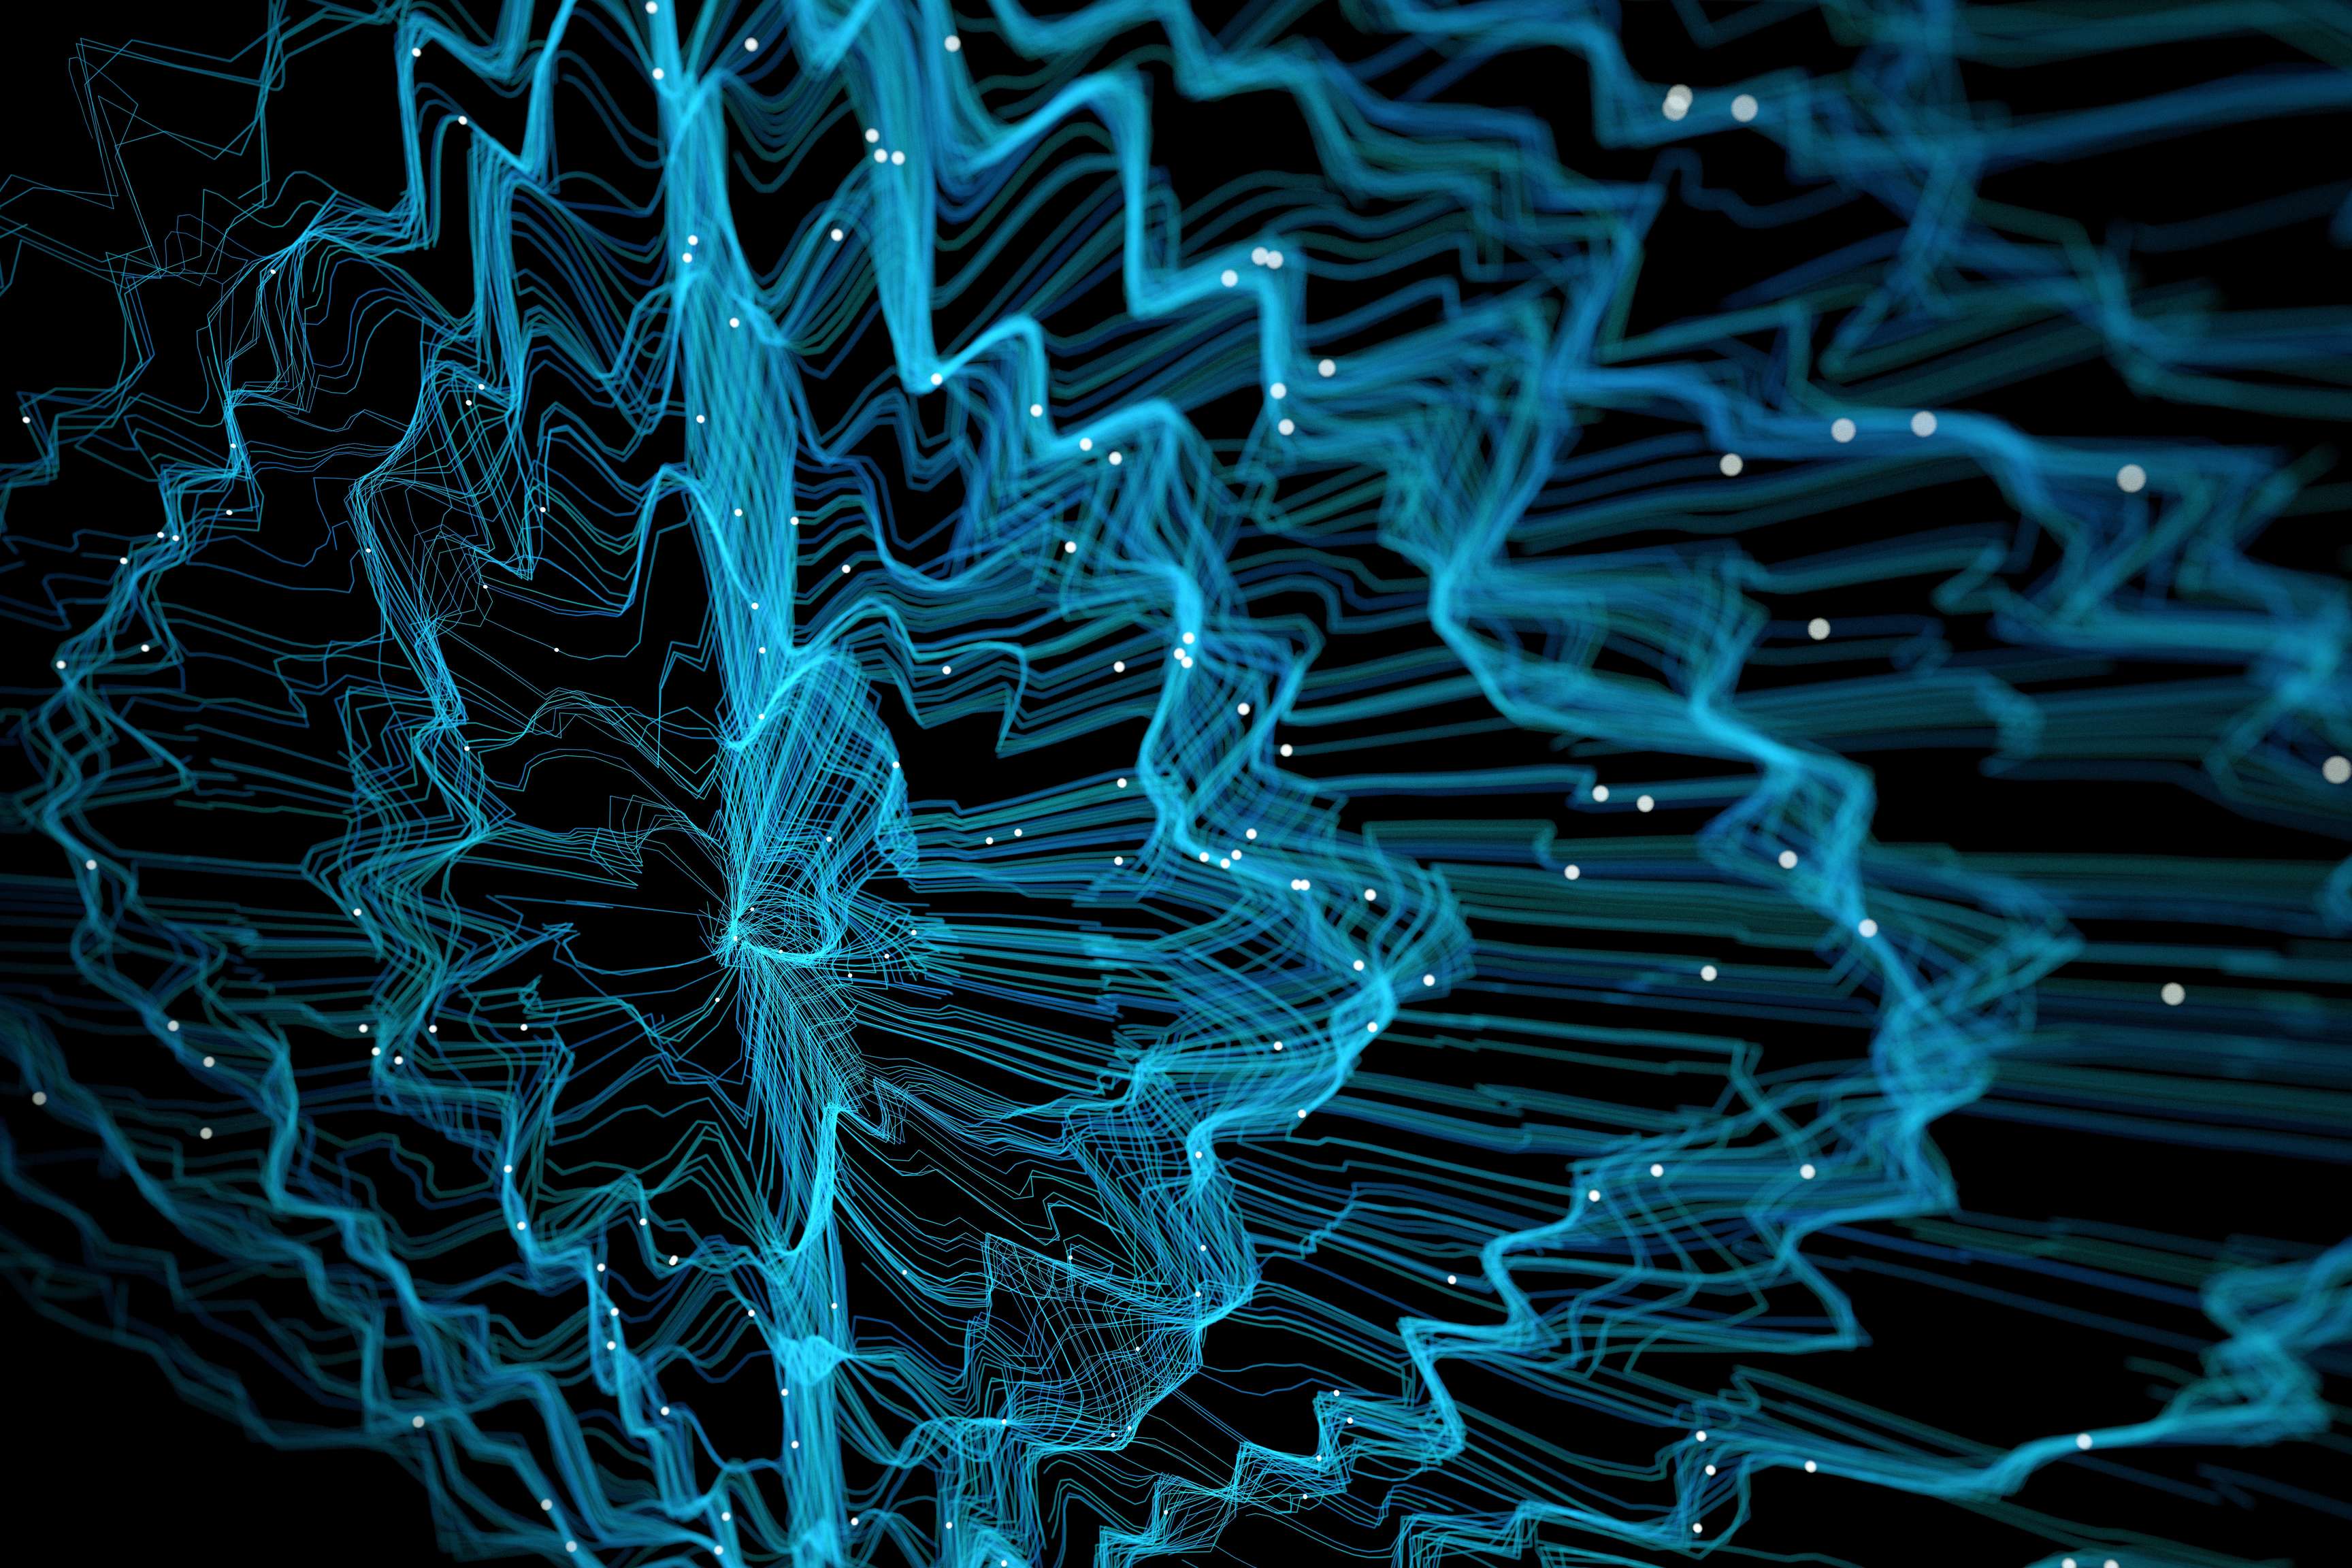 Blue stripes abstractly form a neural computer network against a dark background.